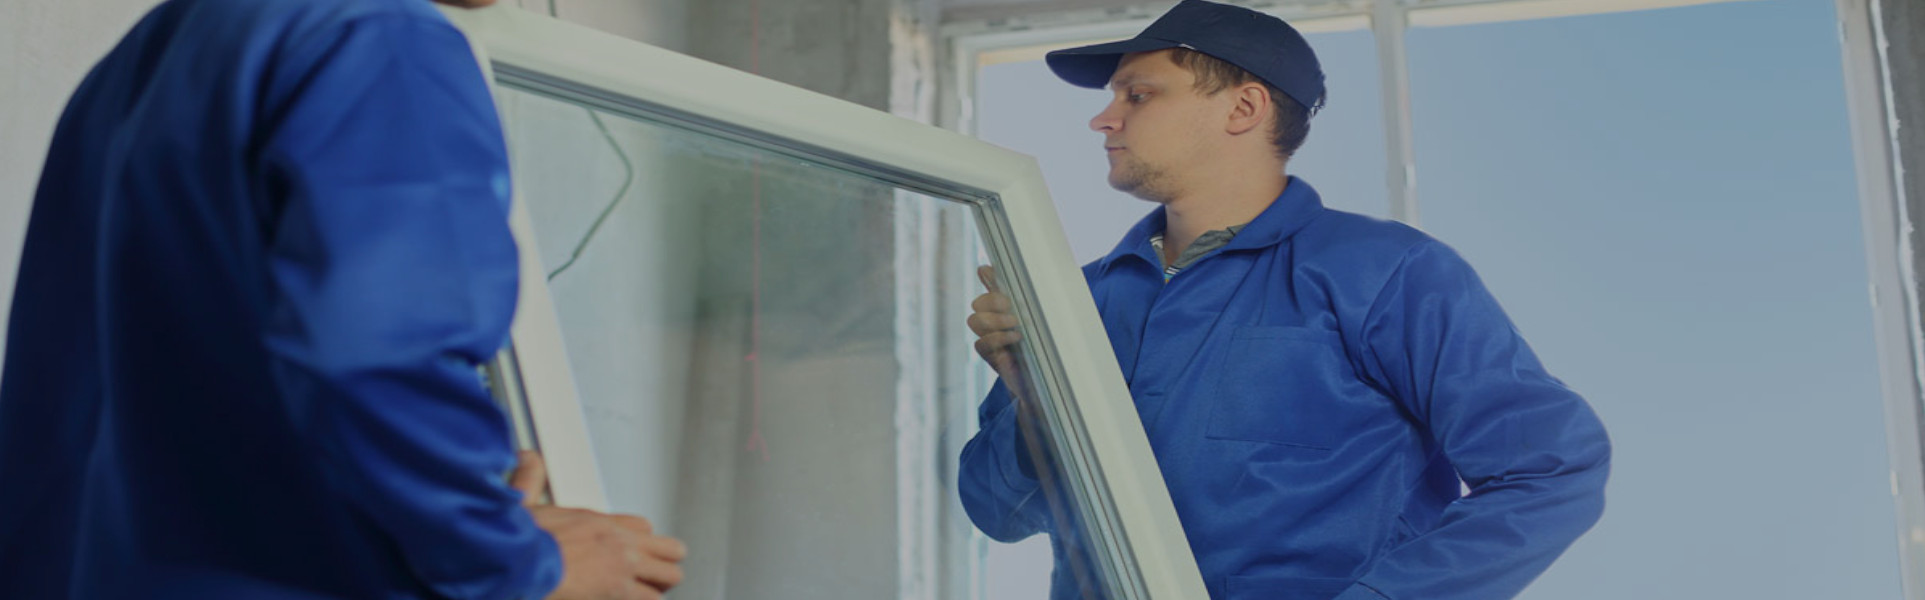 Slider, Double Glazing Installers in Hither Green, SE13